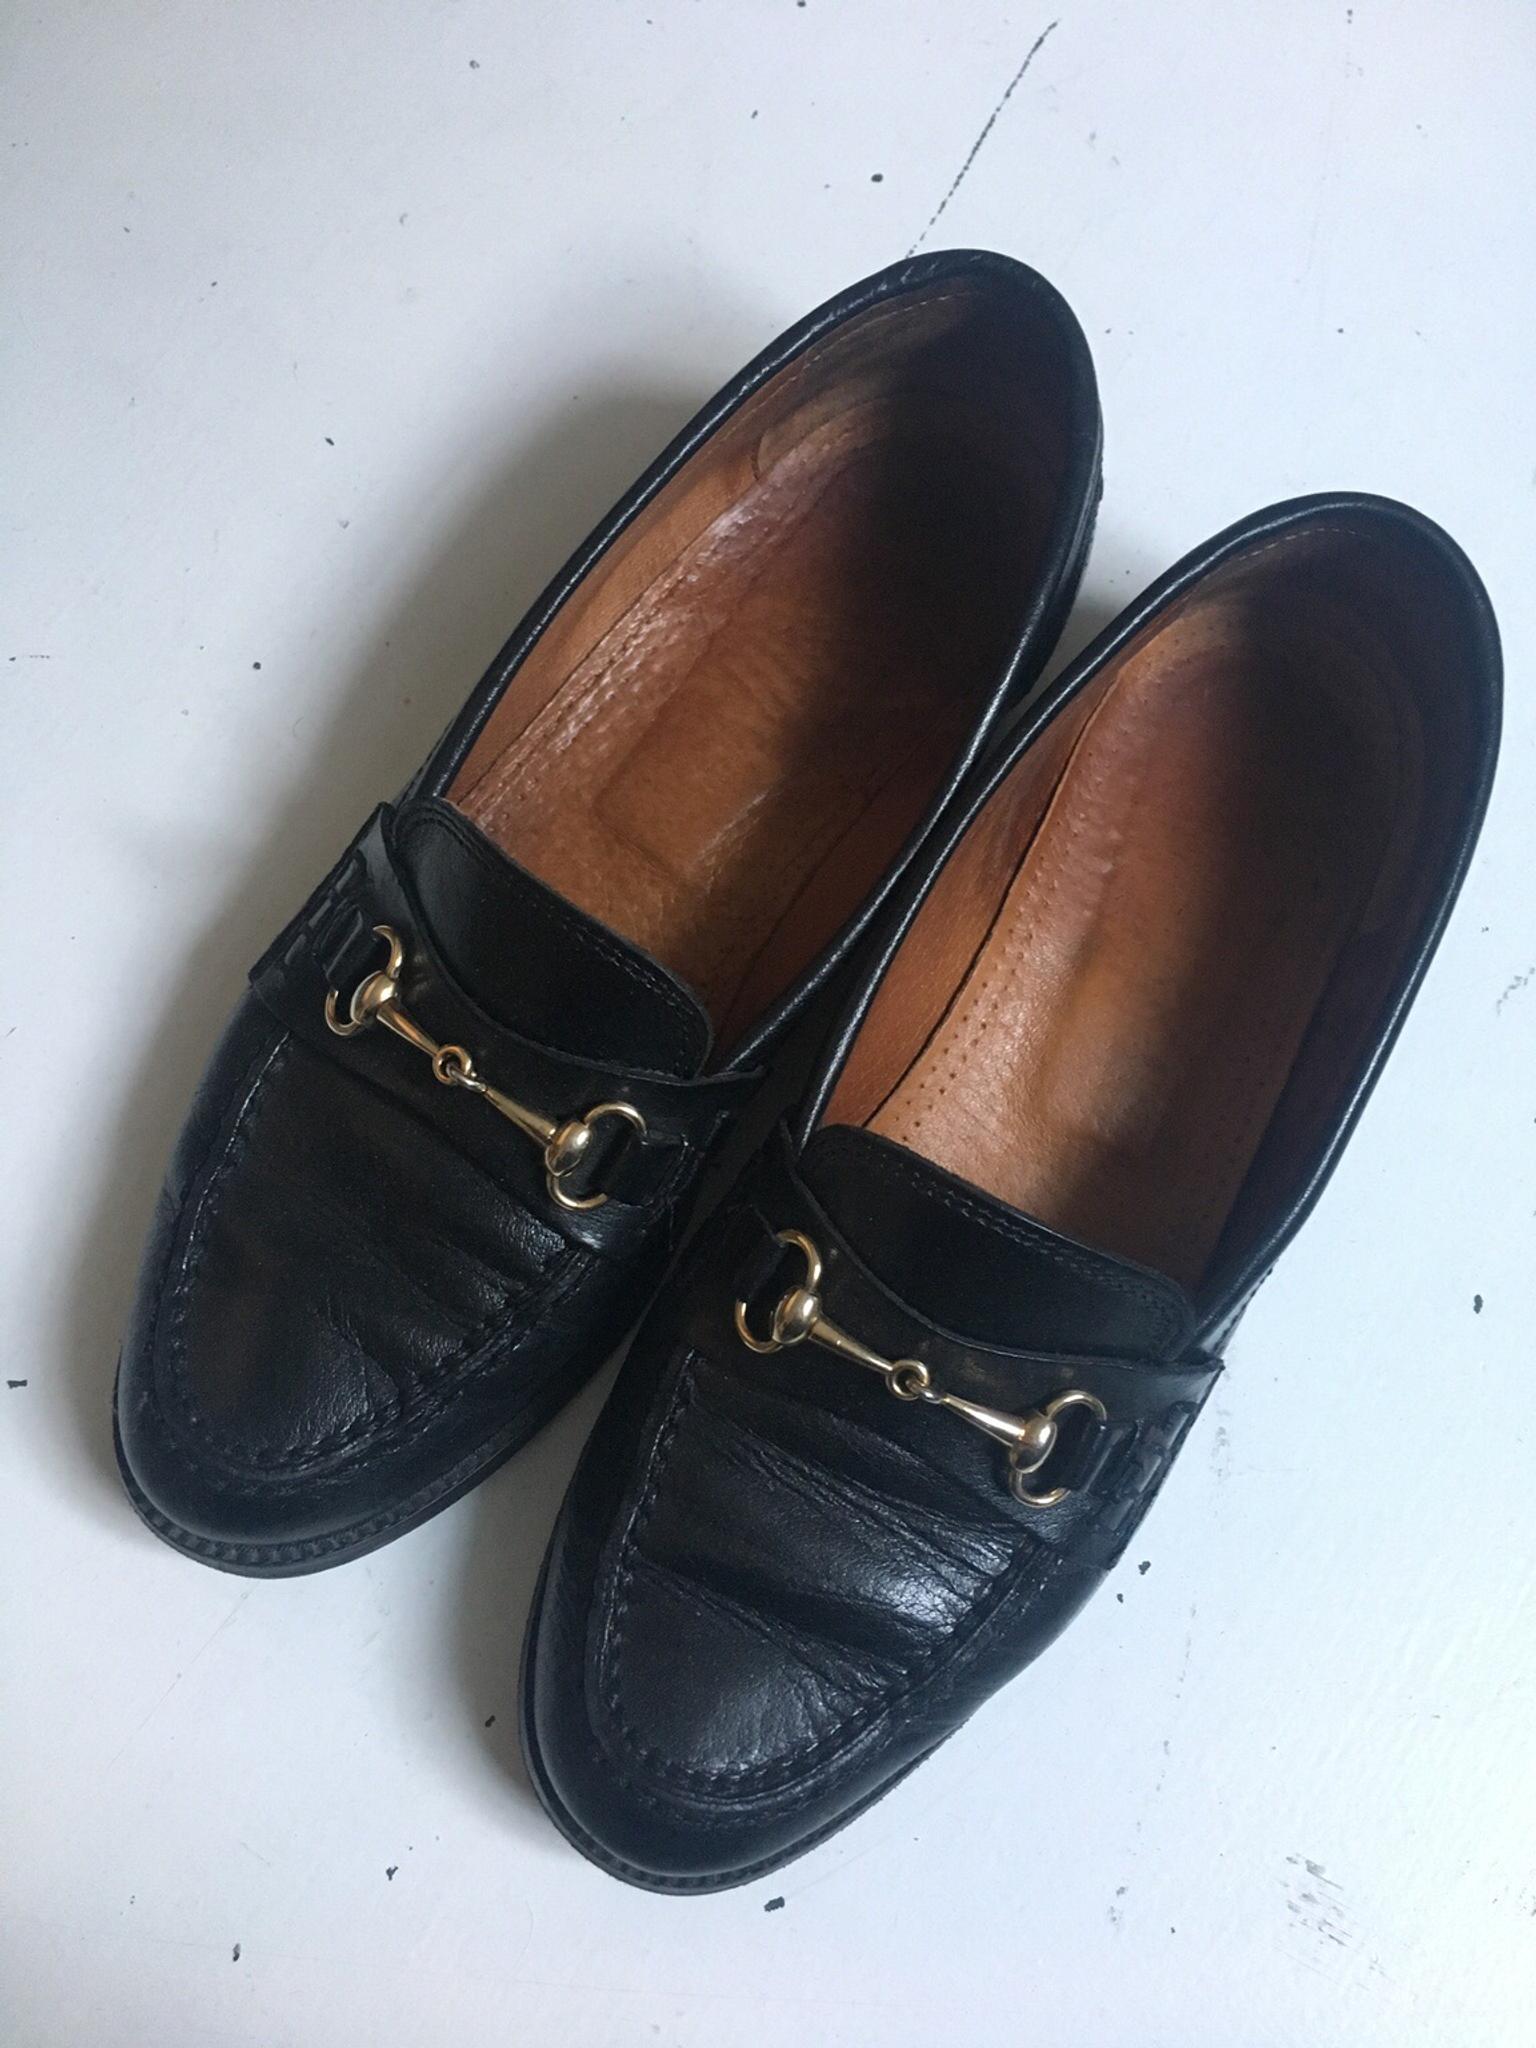 russell and bromley loafers womens